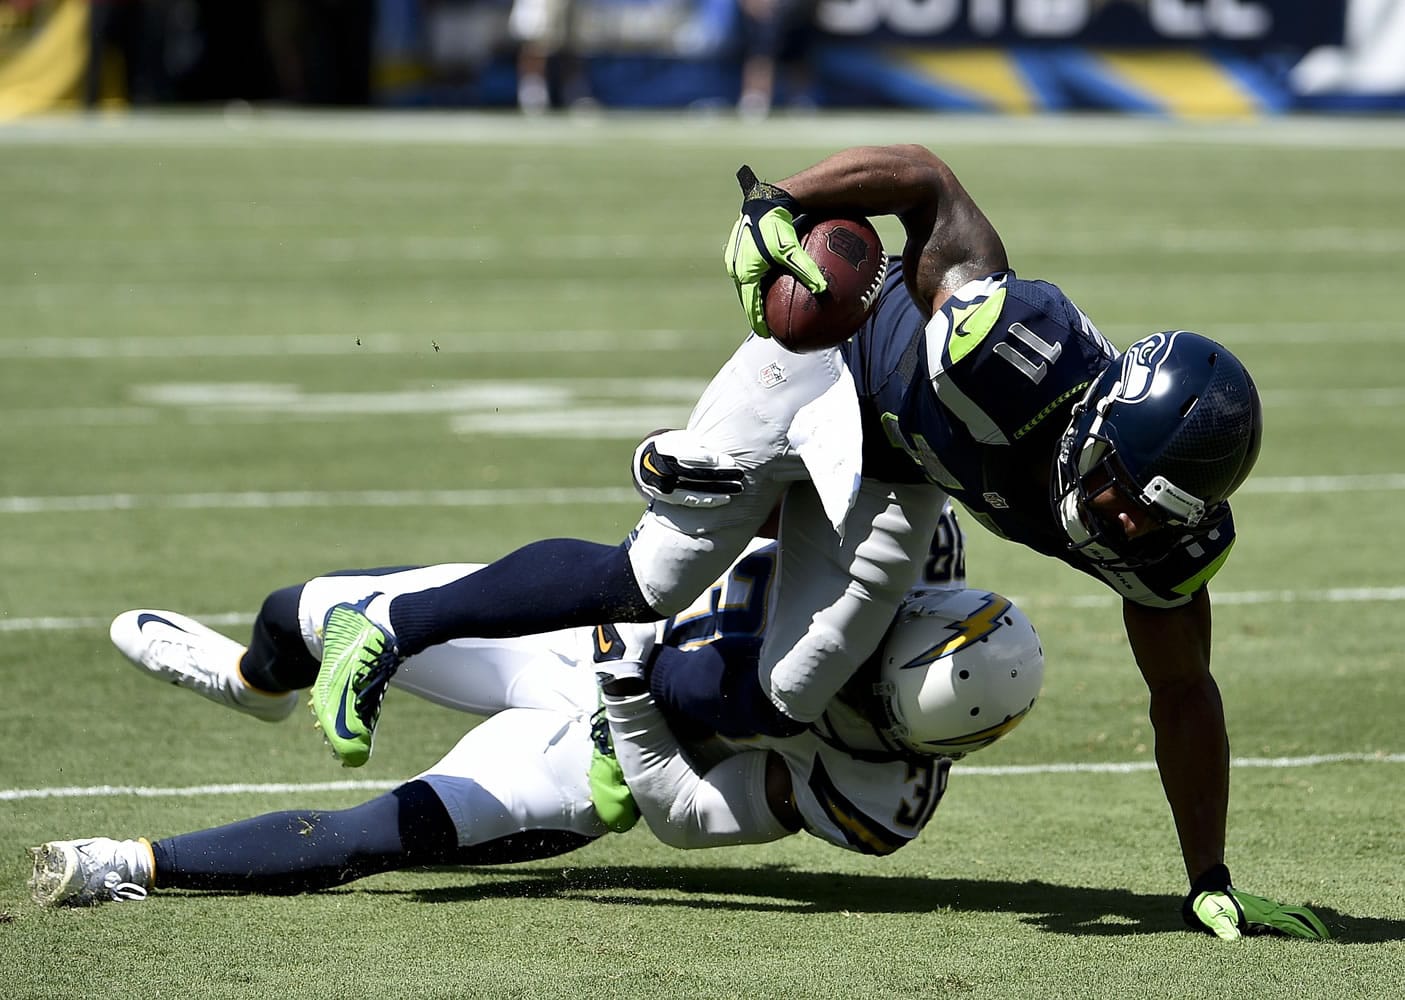 Seattle Seahawks wide receiver Percy Harvin, right, is tackled by San Diego Chargers strong safety Marcus Gilchrist during the first half Sunday, Sept. 14, 2014, in San Diego.